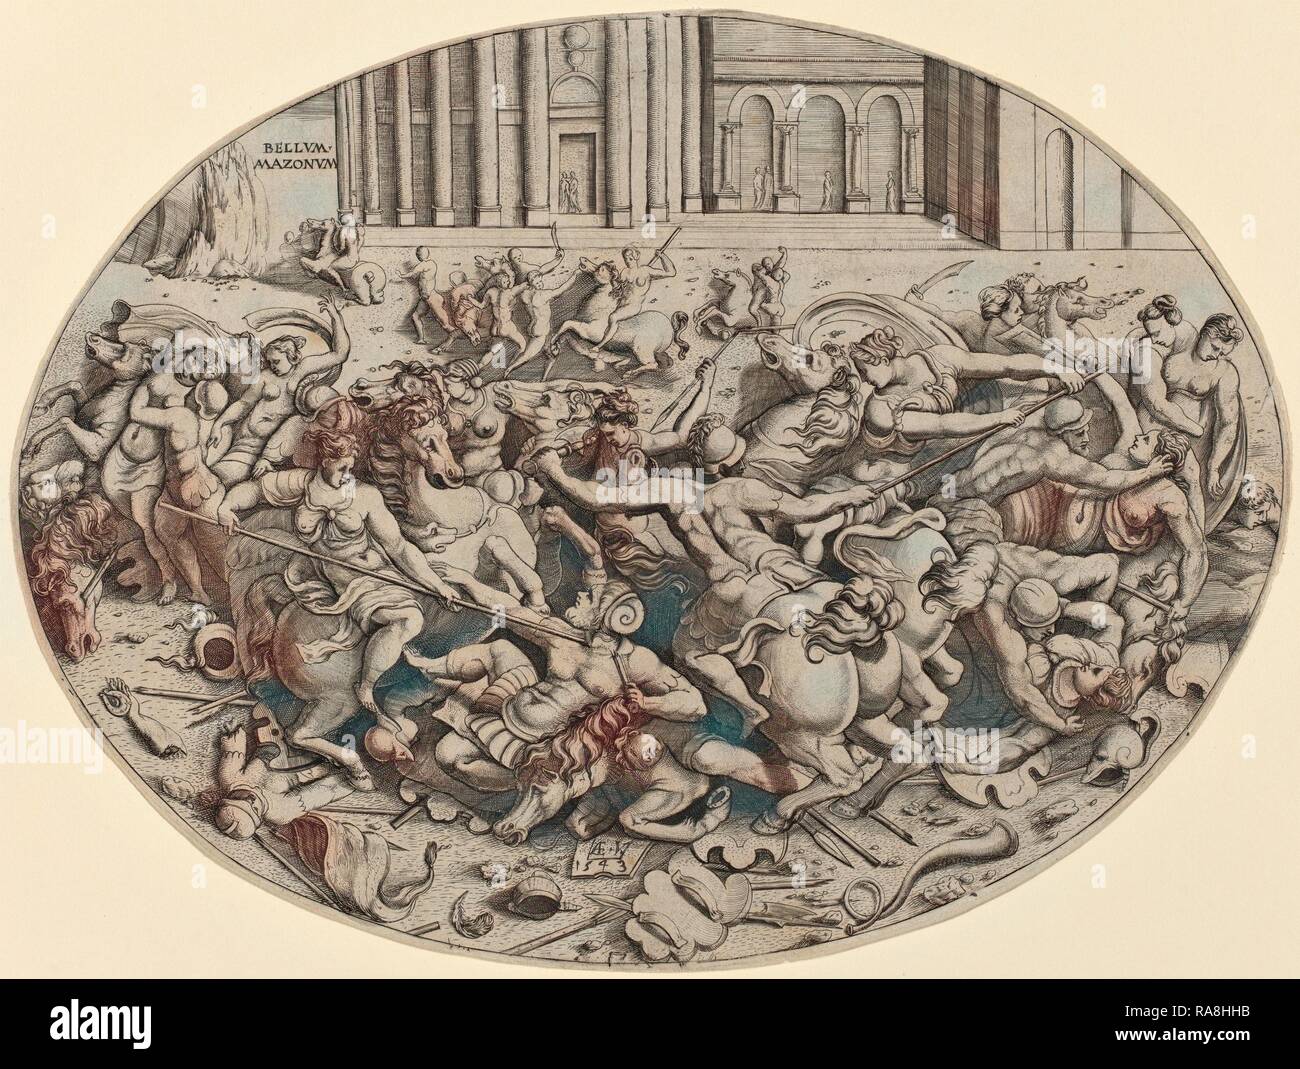 Enea Vico (Italian, 1523 - 1567), The Battle of the Amazons [recto], 1543, engraving. Reimagined by Gibon. Classic reimagined Stock Photo